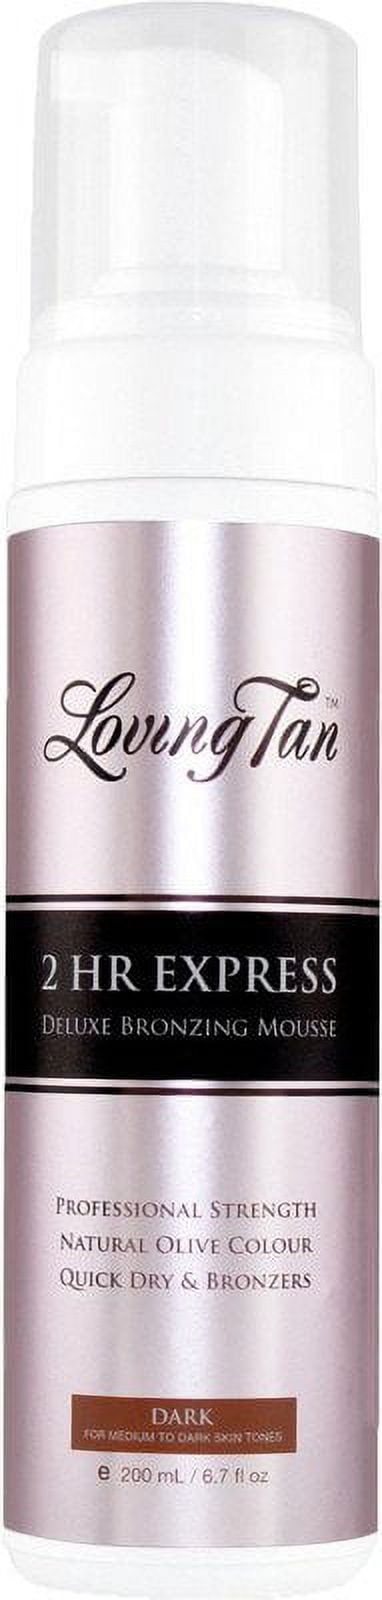  Loving Tan 2 HR Express Mousse, Dark- Streak Free, Natural  looking, Professional Strength Sunless Tanner - Up to 5 Self Tan  Applications per Bottle, Cruelty Free, Naturally Derived DHA 